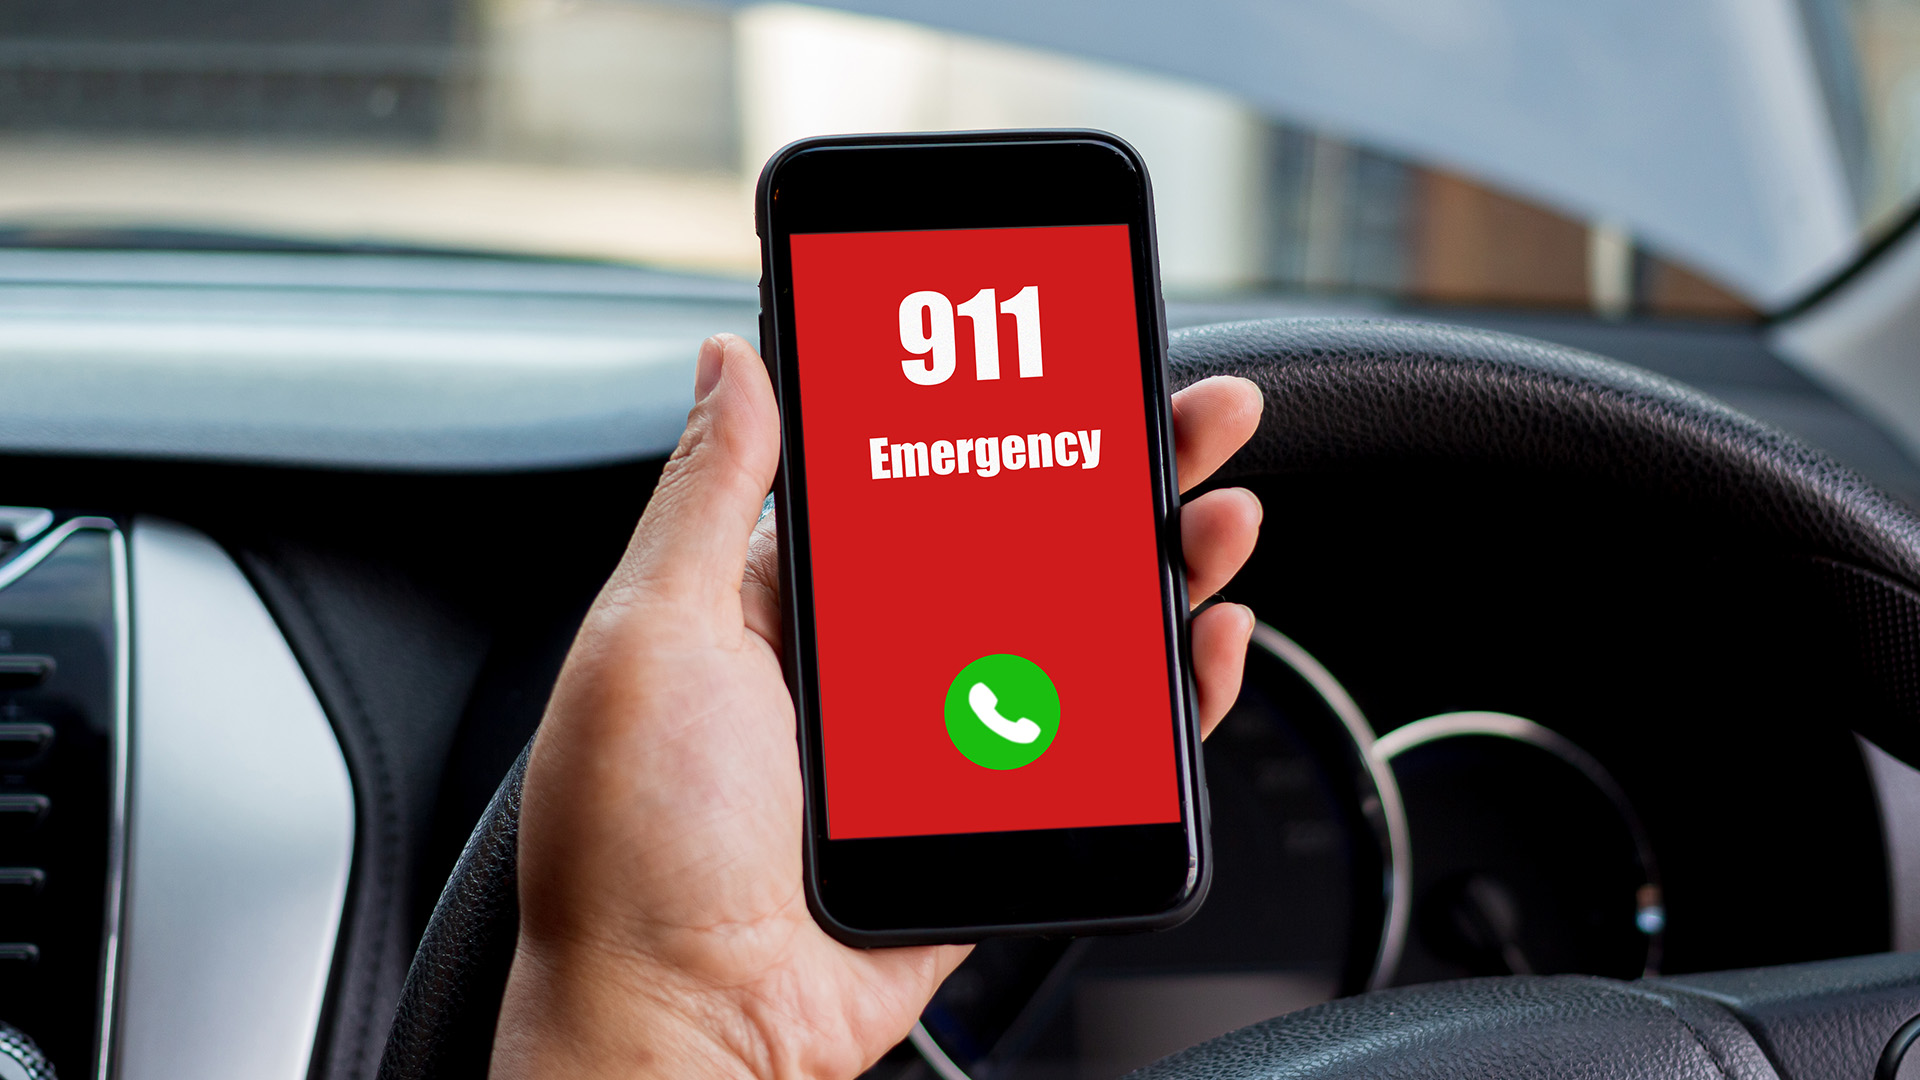 Breaking News: Multiple States in Crisis as 911 Call Lines Go Silent with ‘Eerie’ Alerts